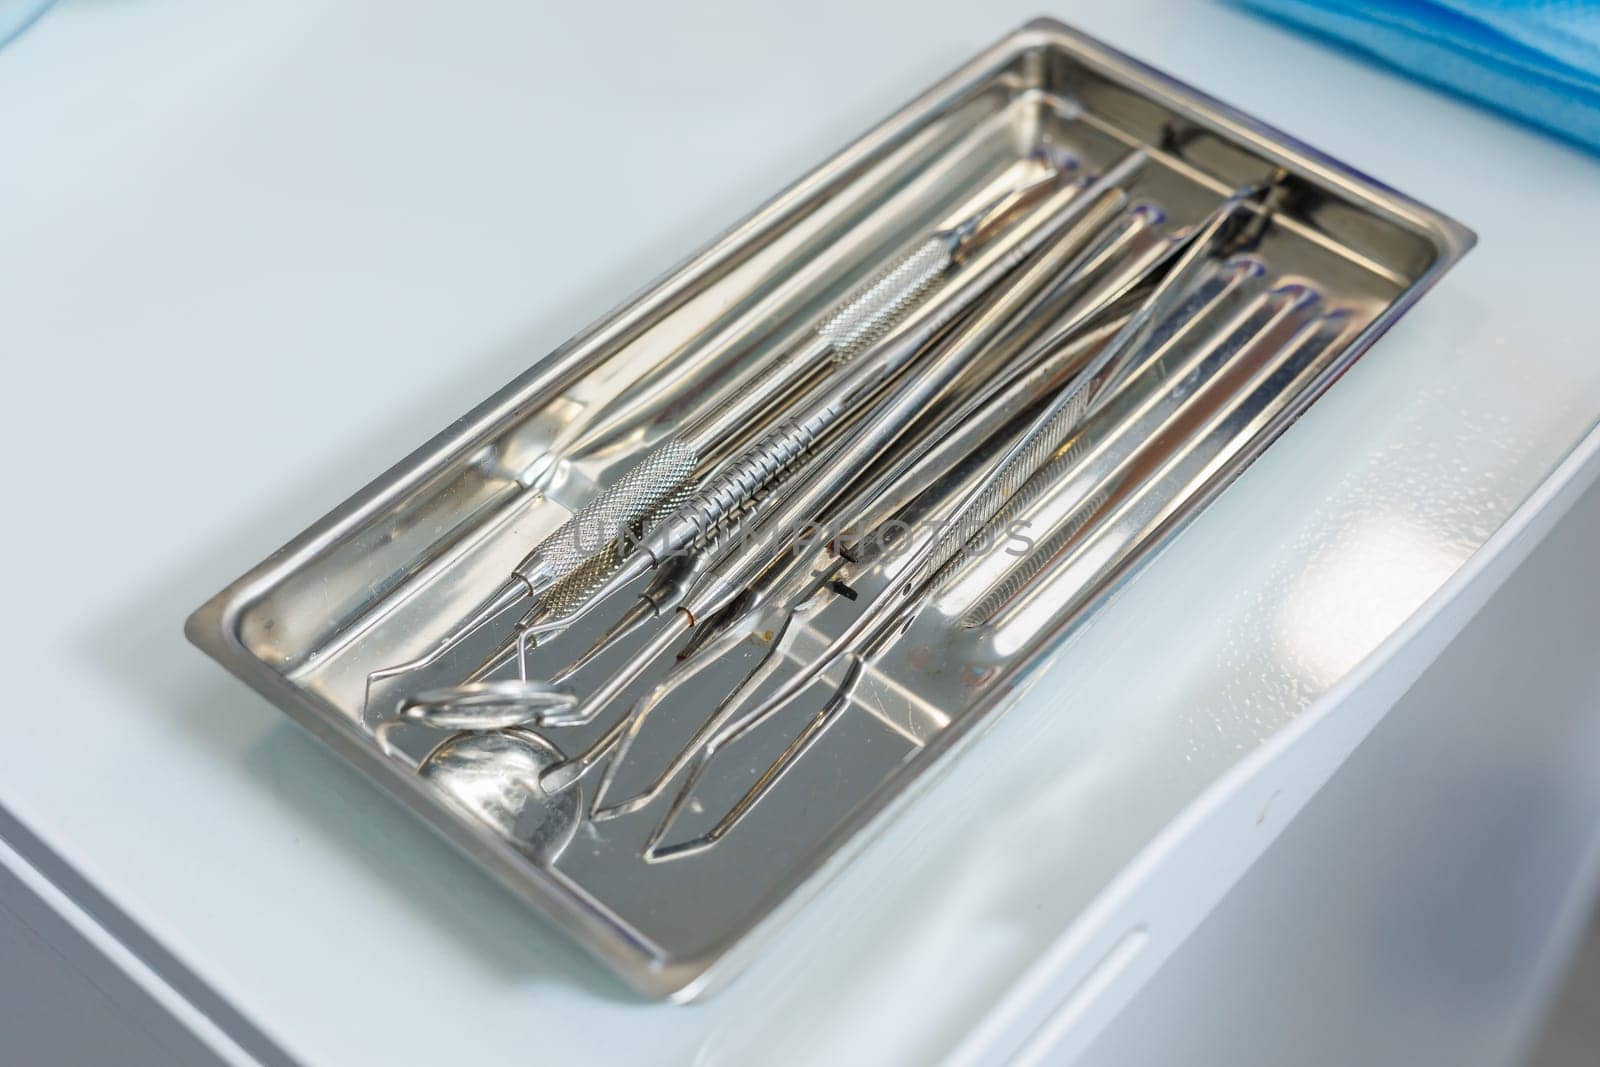 Tray with metal dental tools. Tools of the dentist. Interior of a patient reception room with dental equipment in a dental clinic. by Dmitrytph